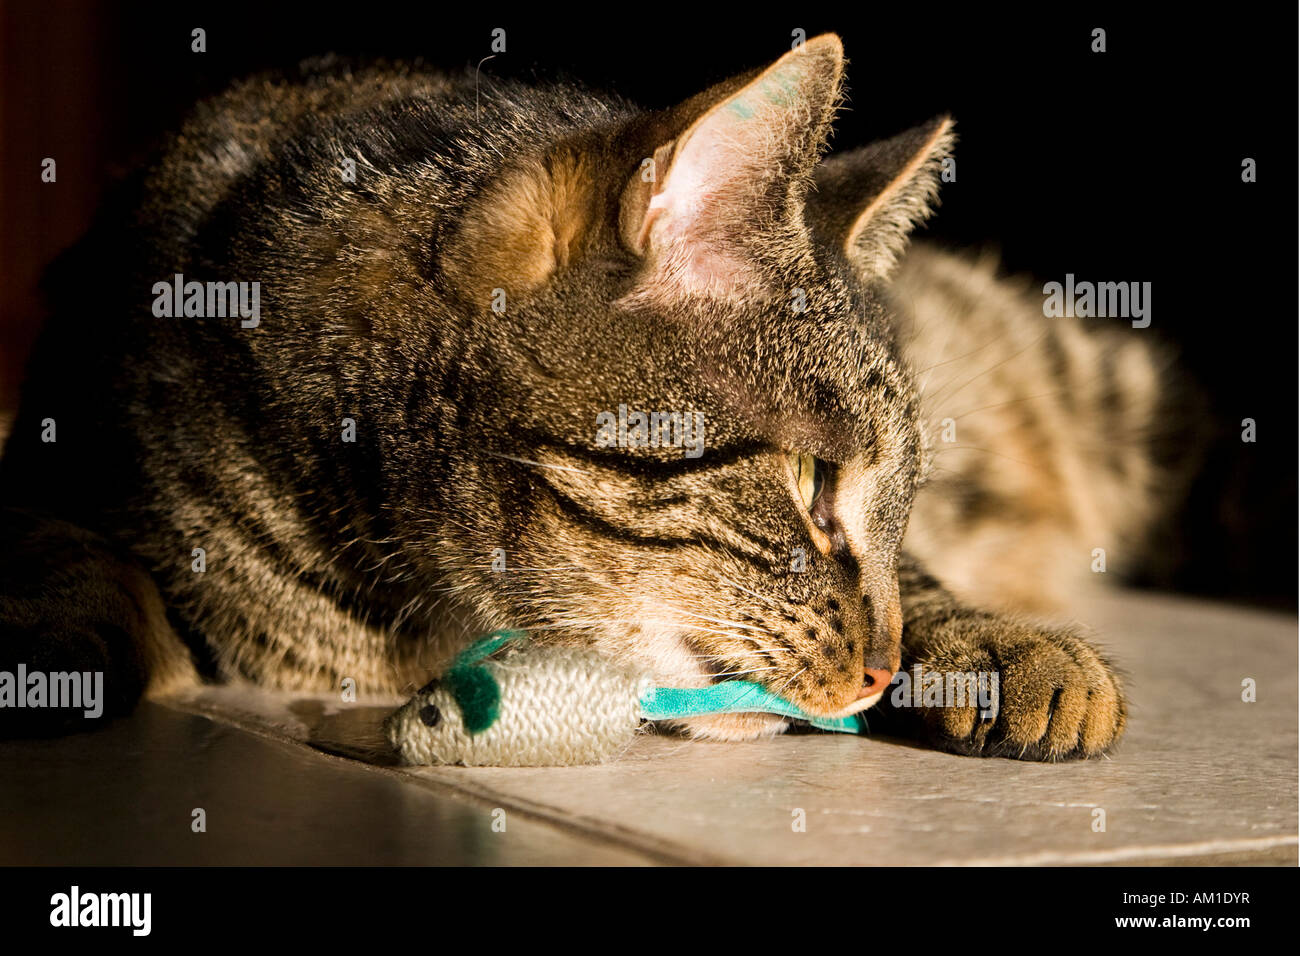 European shorthair cat is playing with a toy mouse Stock Photo